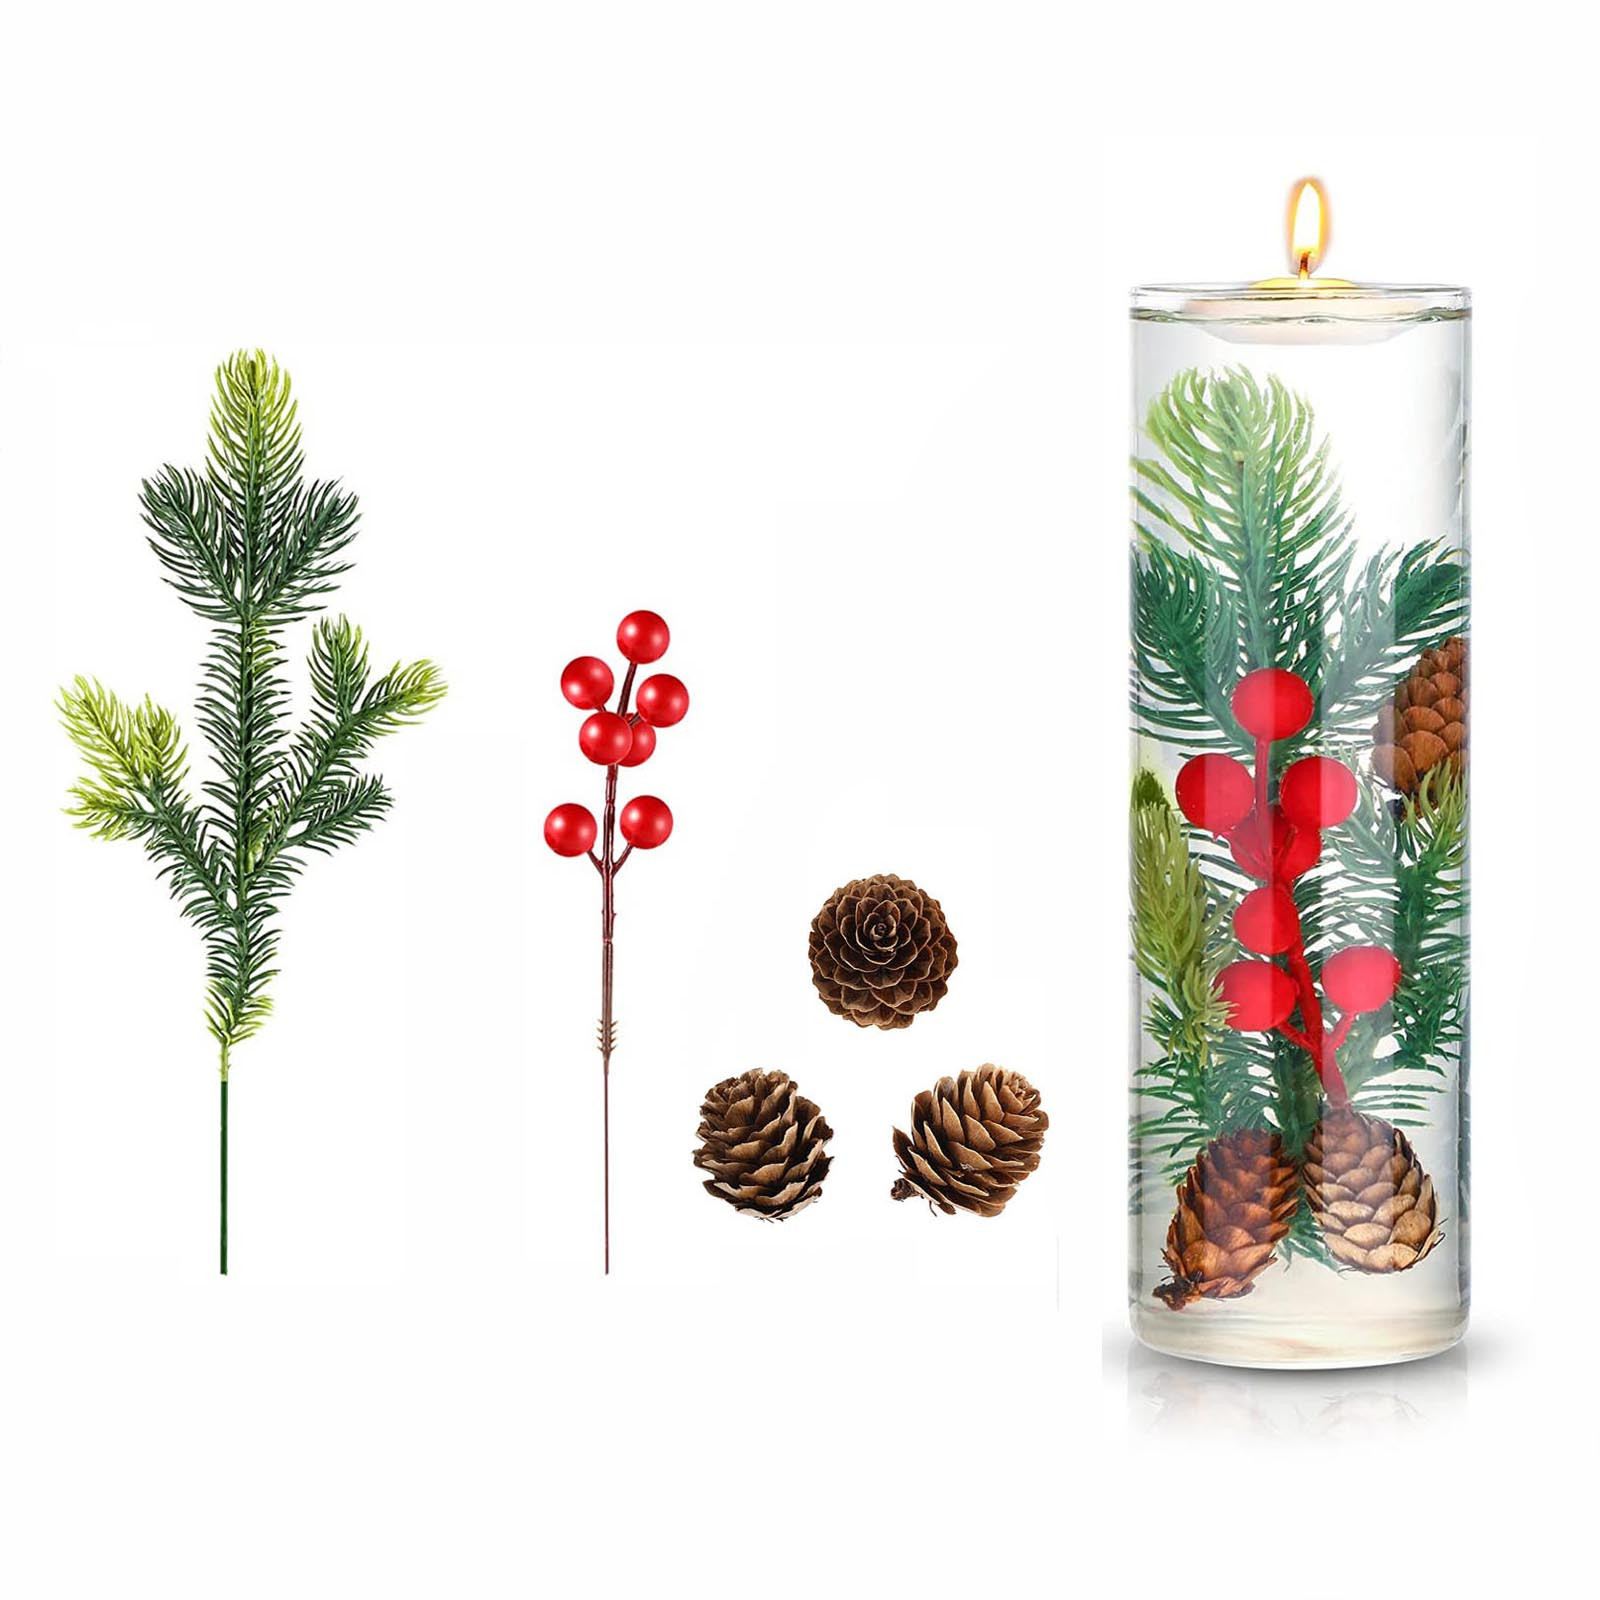 Chgbmok 6 Set Christmas Holly Berries Artificial Pine Cone Picks Crystal Beads Vase Filler with Green Leaves Mini Faux Pine Needles for Table